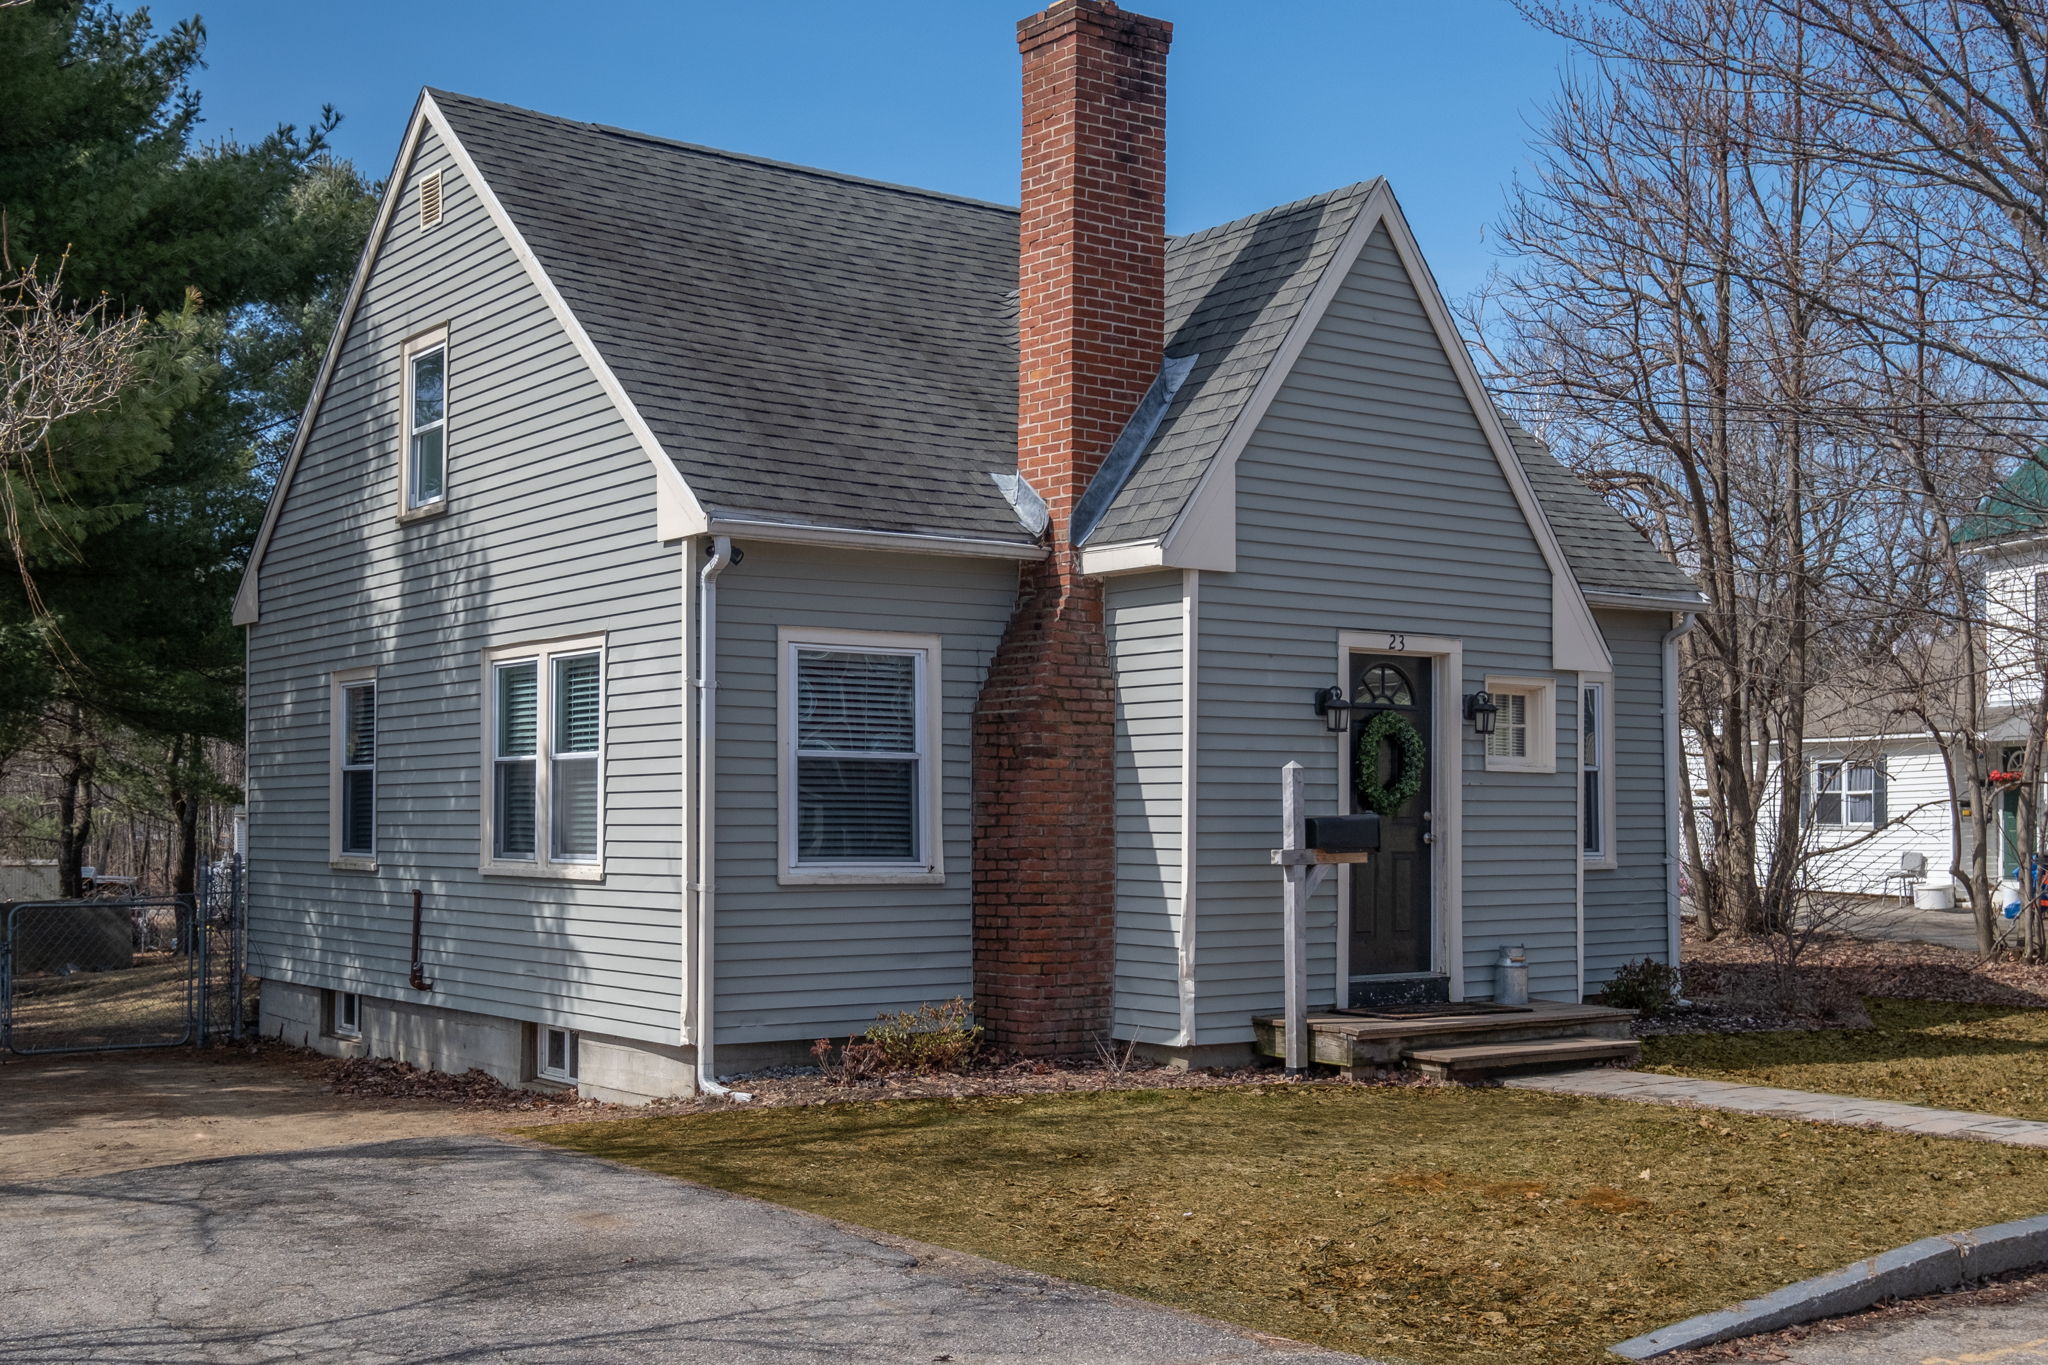  23 West St, Laconia, NH 03246, US